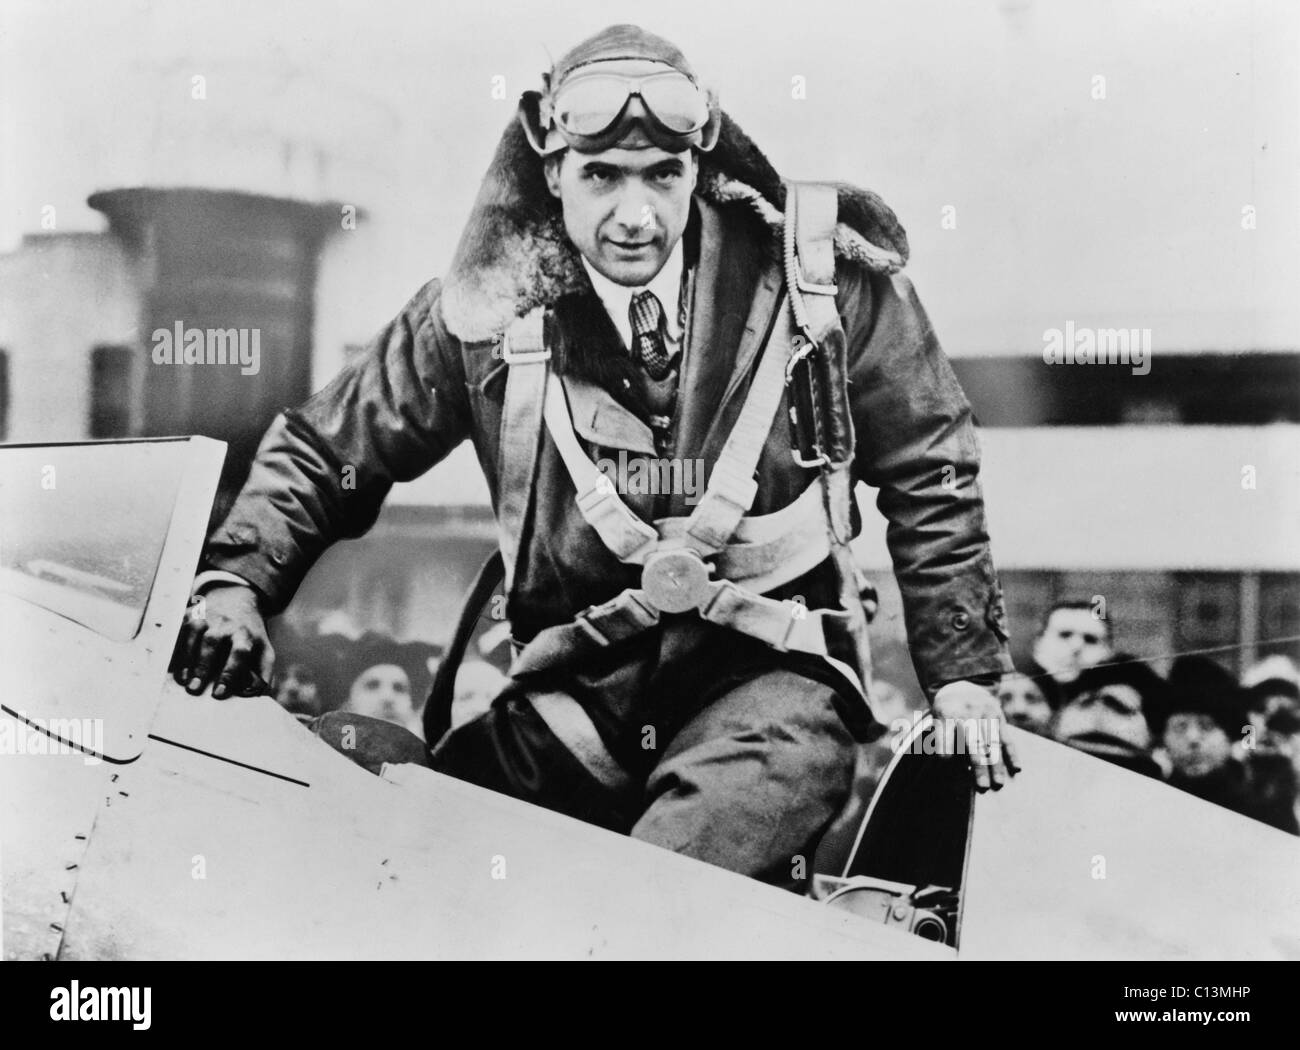 Howard Hughes emerging from an airplane cockpit on his arrival at Newark Airport 7 hours and 28 minutes after leaving from Los Angeles. Hughes averaged a record-breaking speed of 332 miles per hour over the 2 490 mile flight. January 19 1937. LC-USZ62-124392 Stock Photo